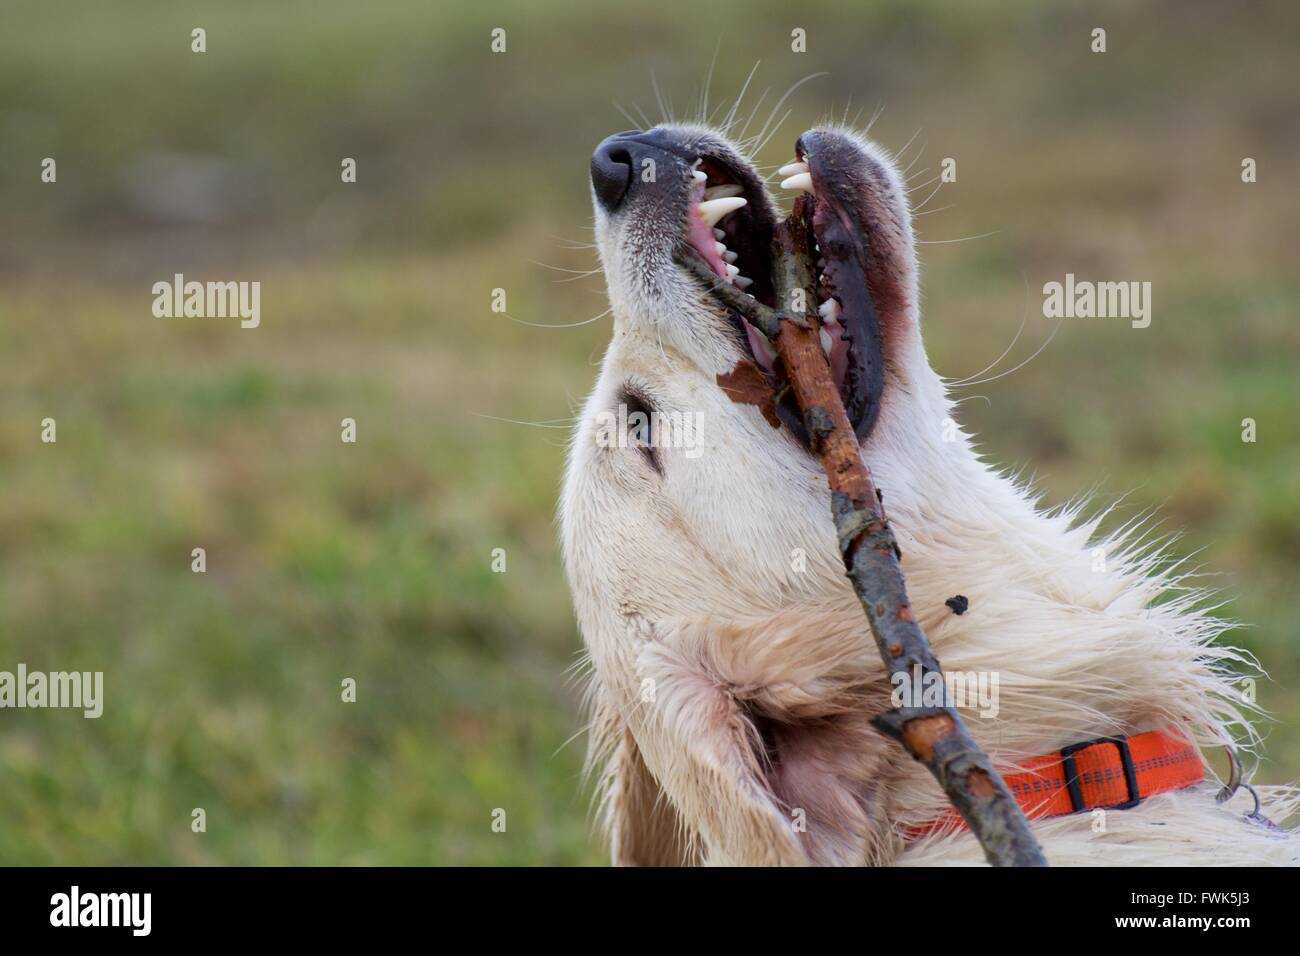 Side View Of Dog Holding Stick In Mouth Stock Photo